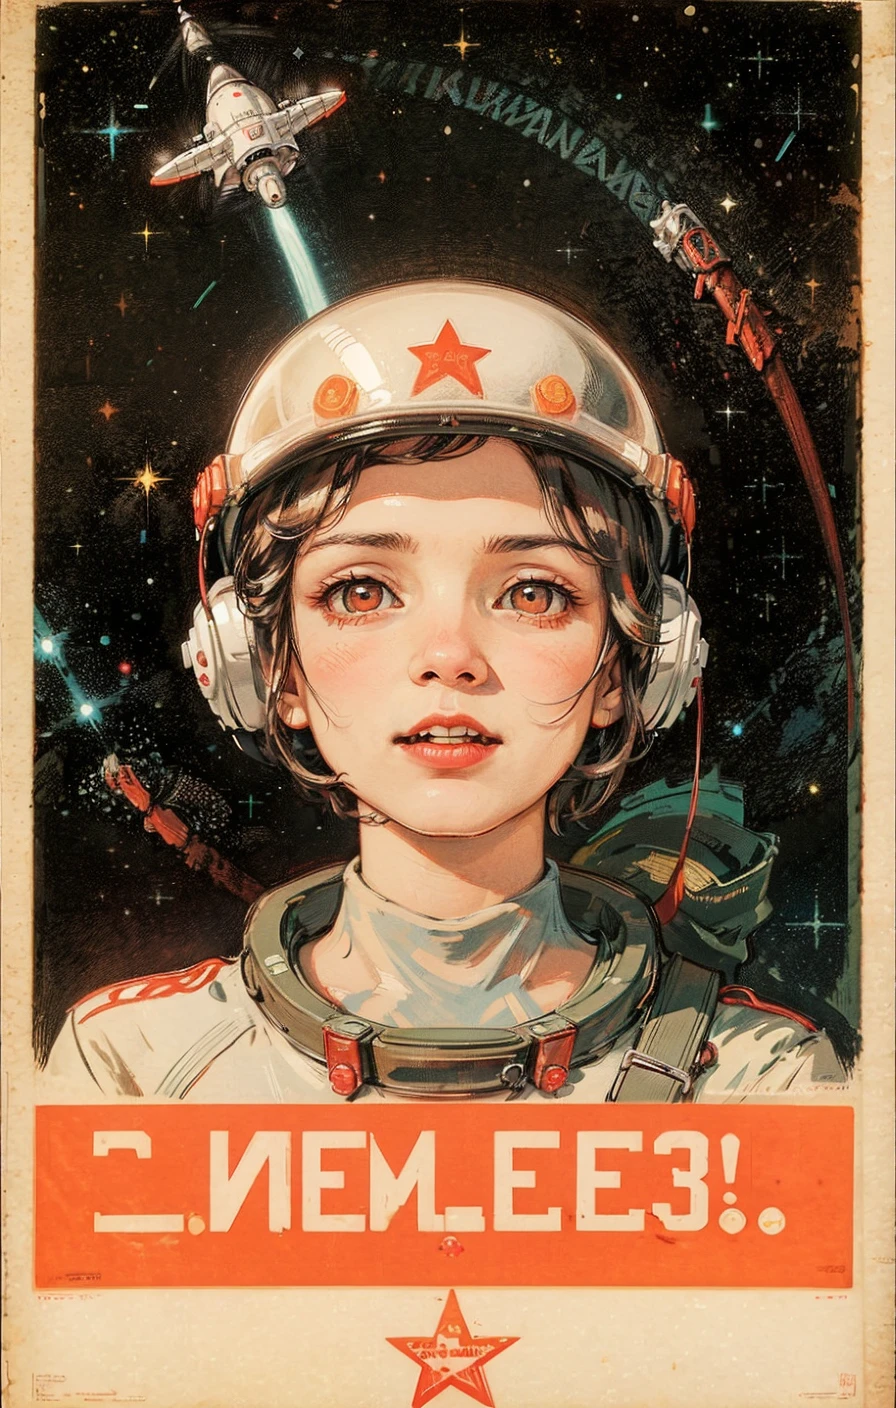 1girl,flat_breasts,cute,beautiful detailed eyes,shiny hair,visible through hair,hairs between eyes, CCCPposter, sovietposter,red monochrome,soviet poster, soviet,communism,
Black_hair,red_eyes,vampire,teenage,poorbreast,Spacesuit:Orange_clothing_body:jumpsuit),white_gloves, white_space shoes, white_helmet, the CCCP red letters on the top of helmet, weightlessness, Side light, reflection, The person in the spacesuit is at the bottom left of the frame, The right hand is outstretched, the right hand gently touches the Salyut space station), Space station in the upper right corner of the screen, Reflected light from the sun, Silver metal,red flag, brilliance,USSR style, diffuse reflection, Metallic texture, The vista is a blue Earth,mecha style,the sea of star,high tone, magnificent